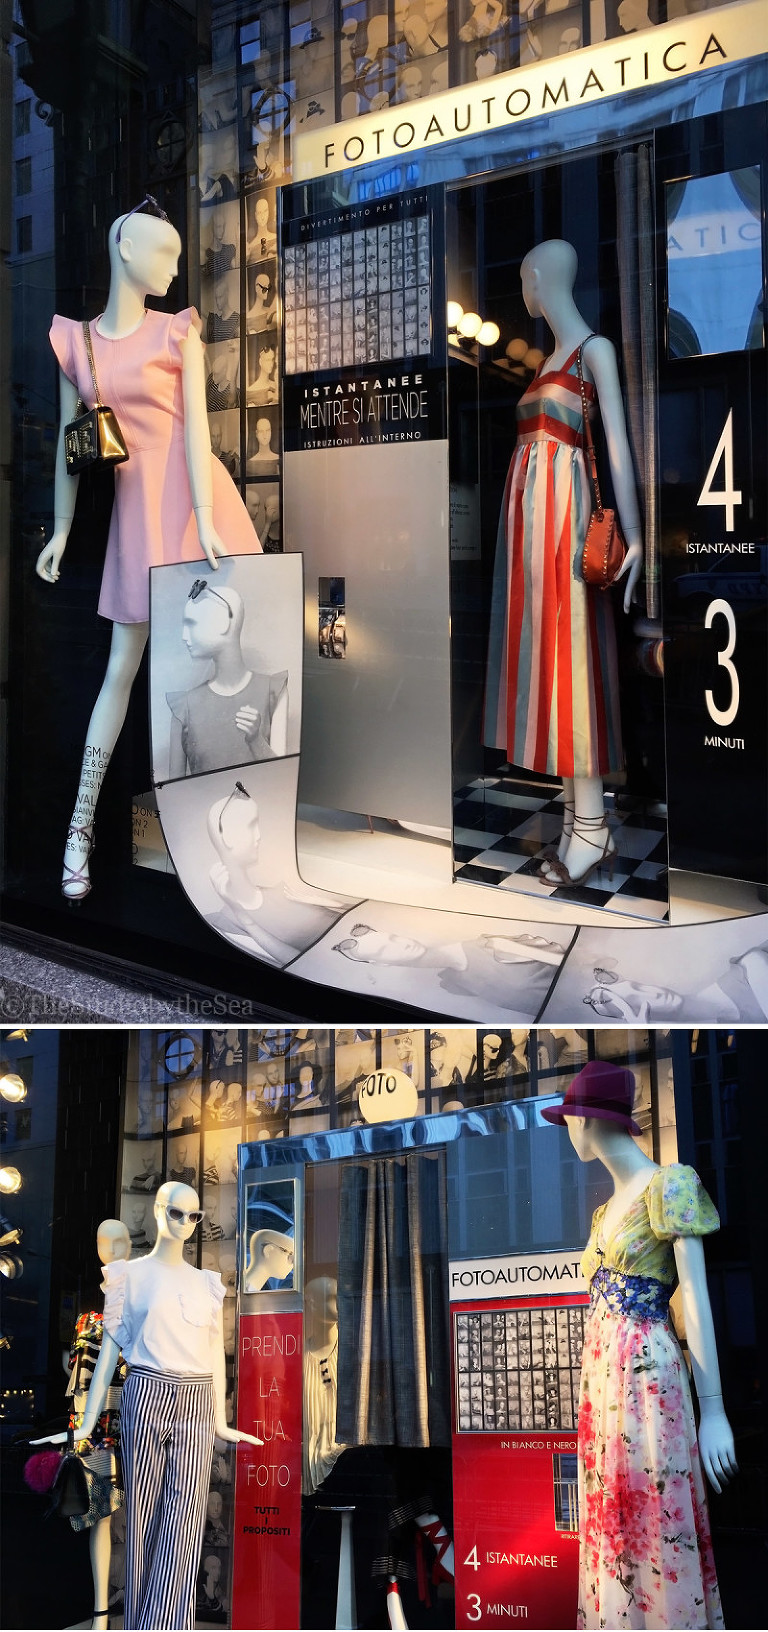 Bergdorf's photo-booth window in NYC